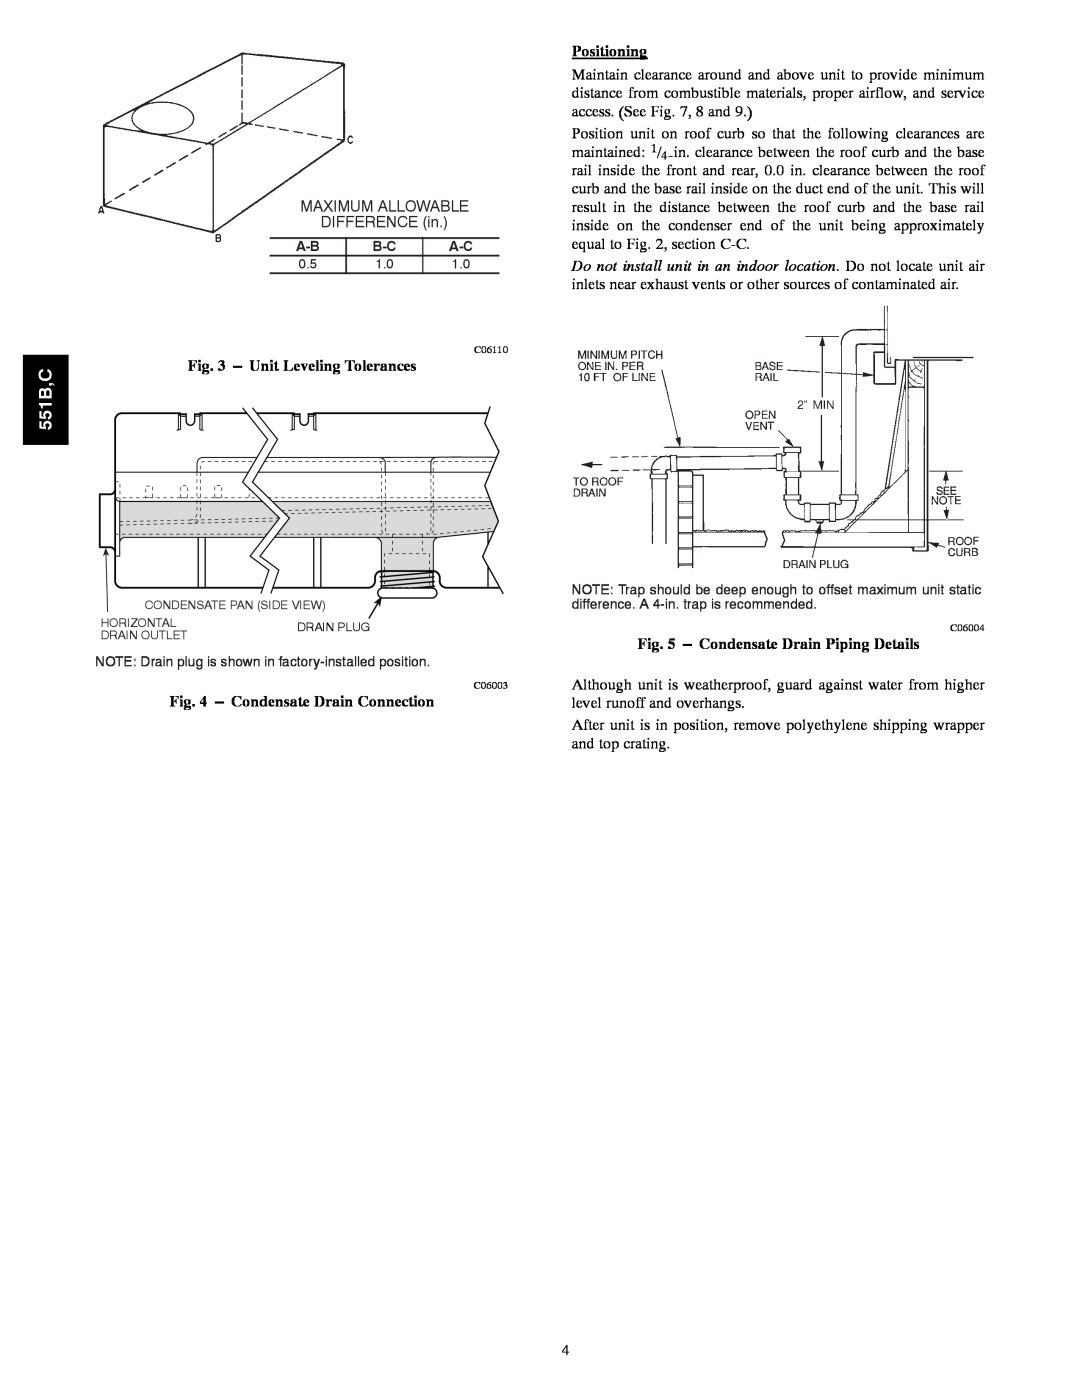 Bryant 551B,C, MAXIMUM ALLOWABLE DIFFERENCE in, Unit Leveling Tolerances, Condensate Drain Connection, Positioning 